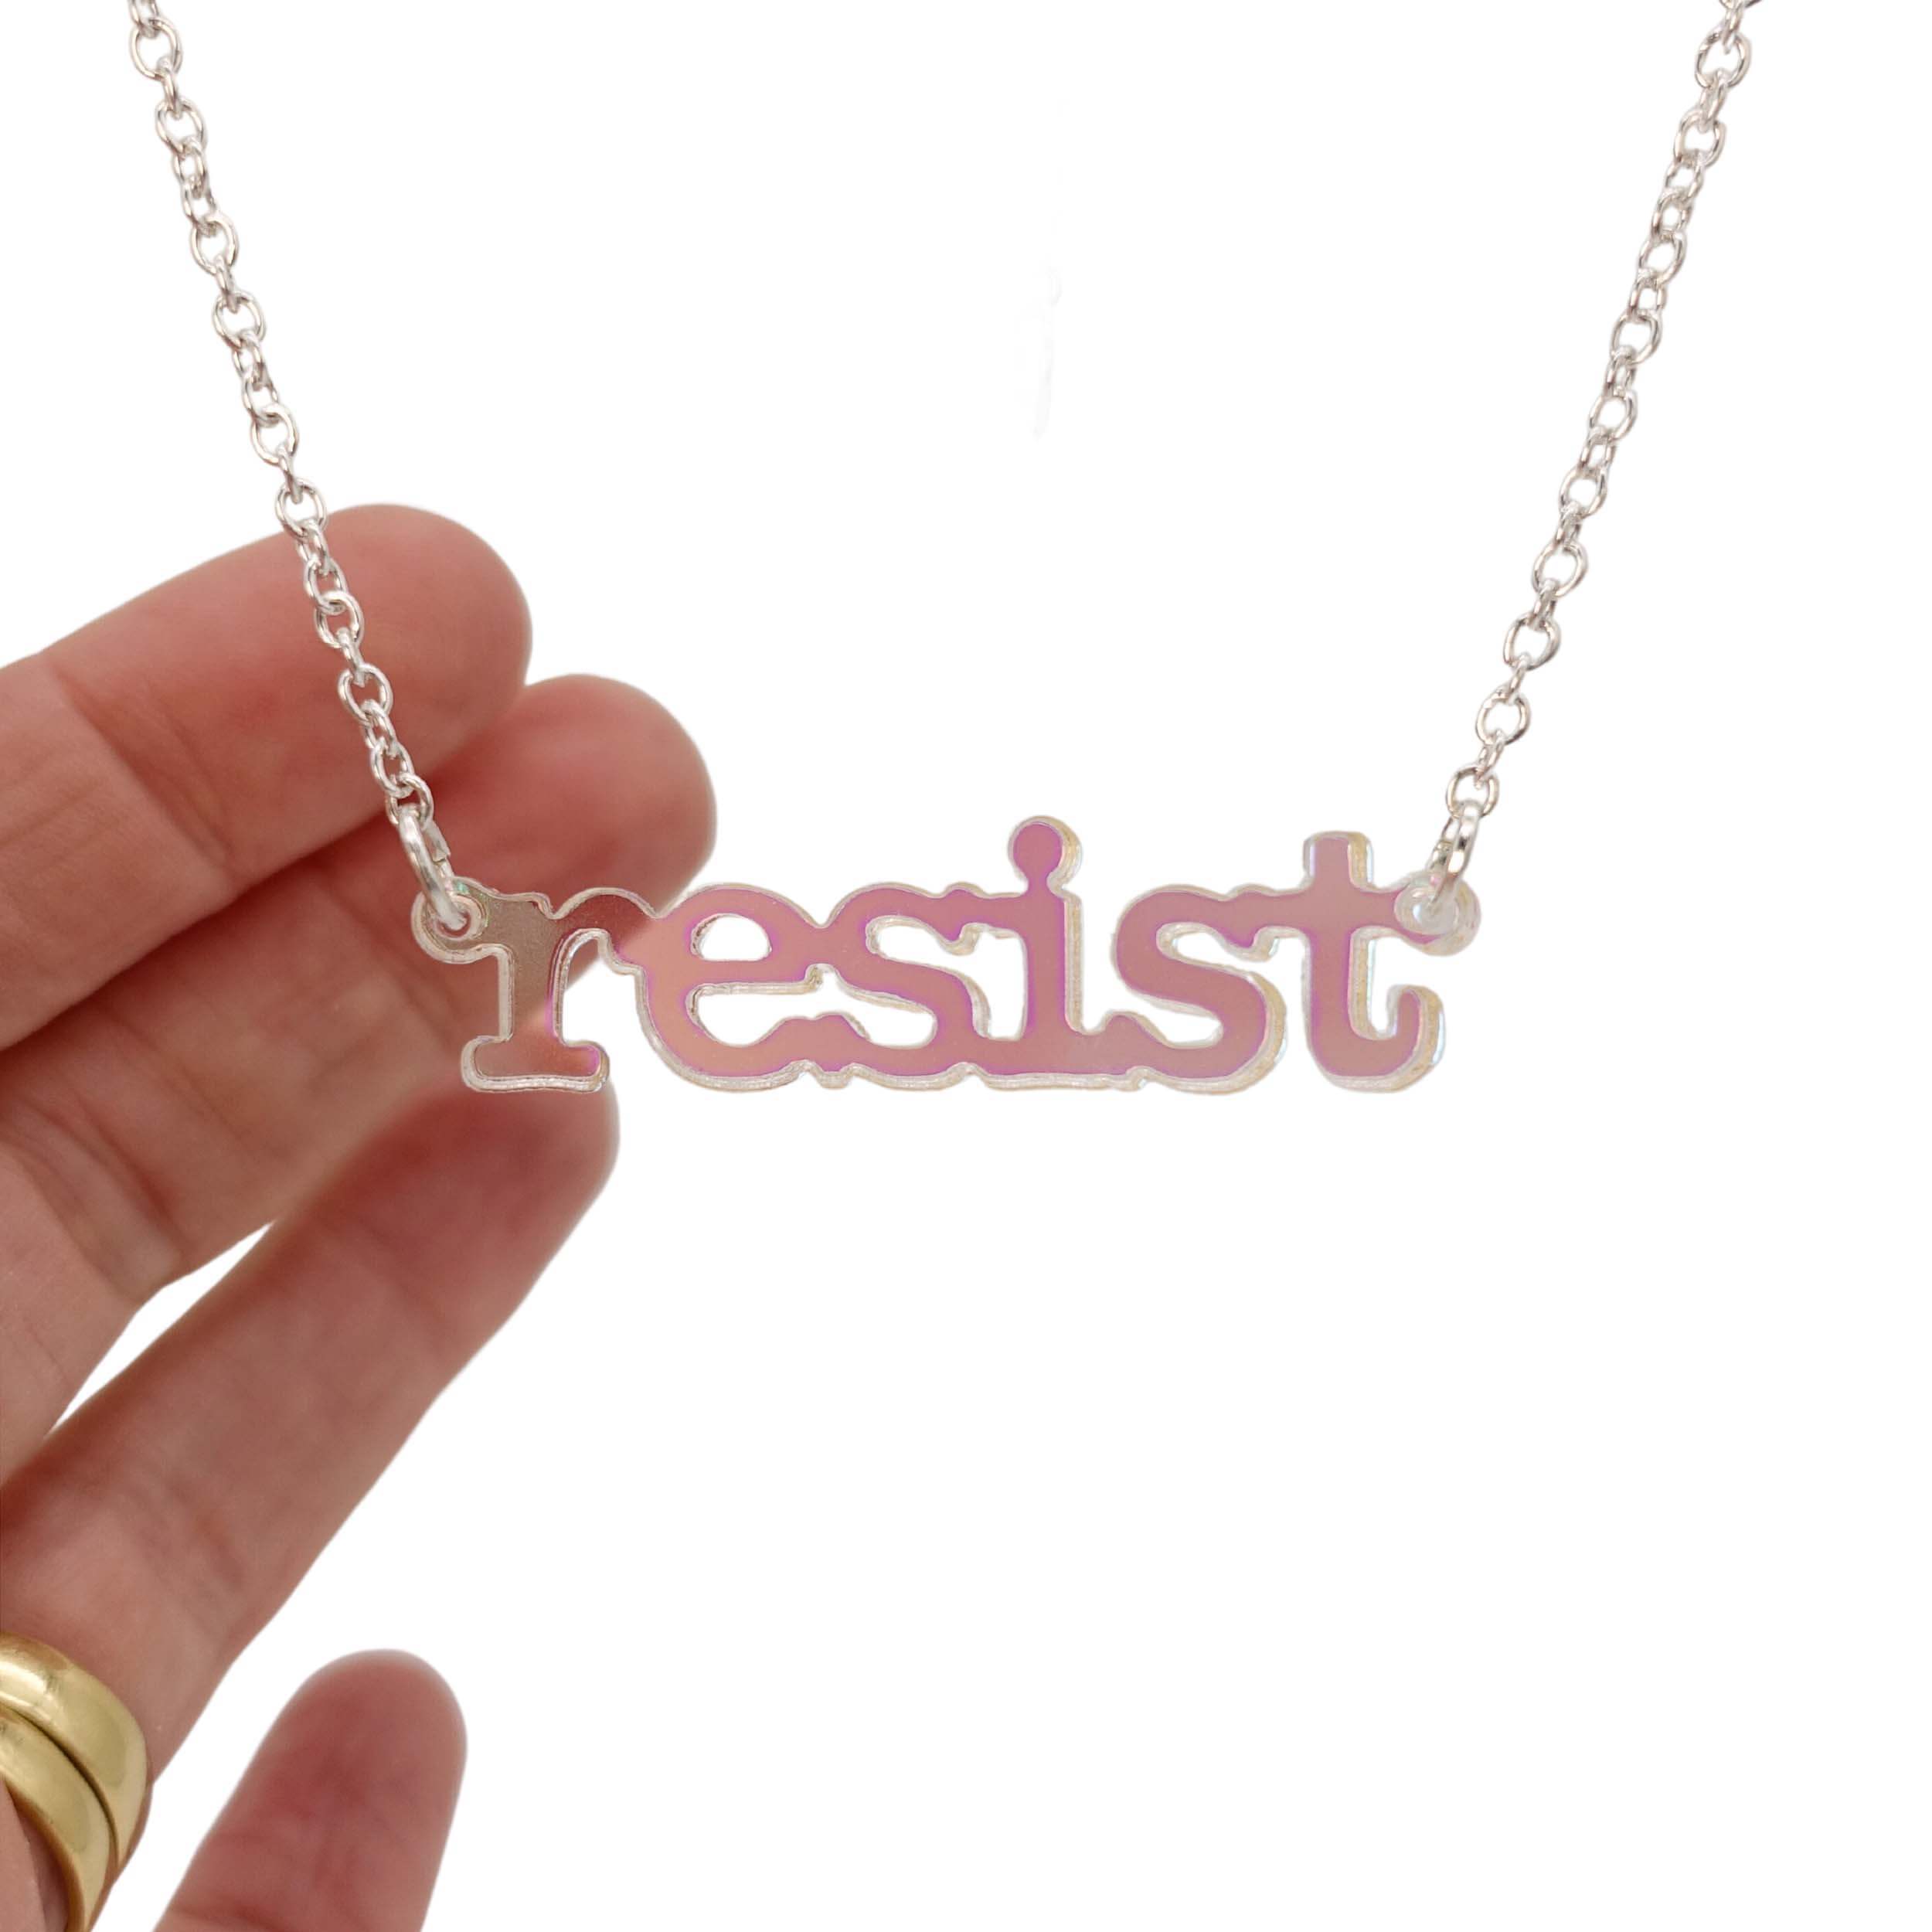 Iridescent Resist necklace in typewriter font hanging on a silver chain against a white background. 